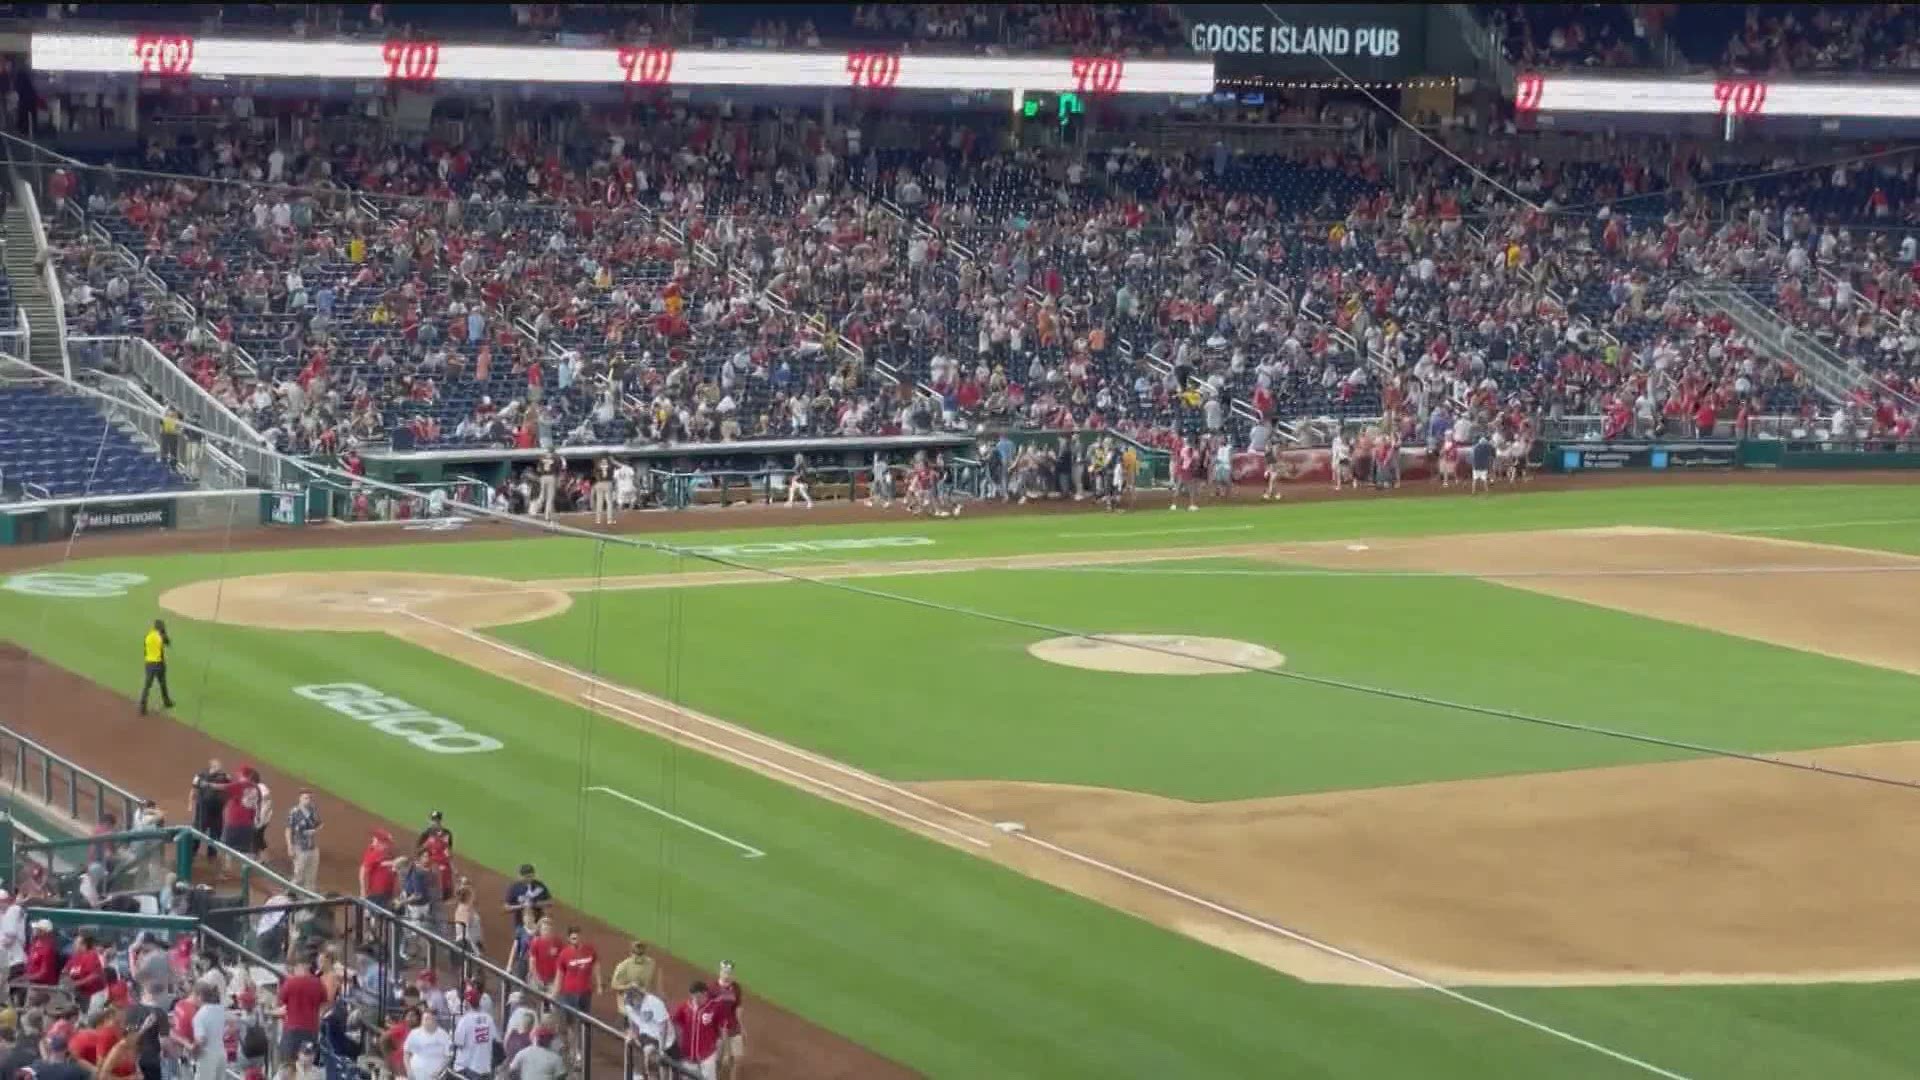 News 8 talked with a Padres fan who was in Nationals Park during the chaos.